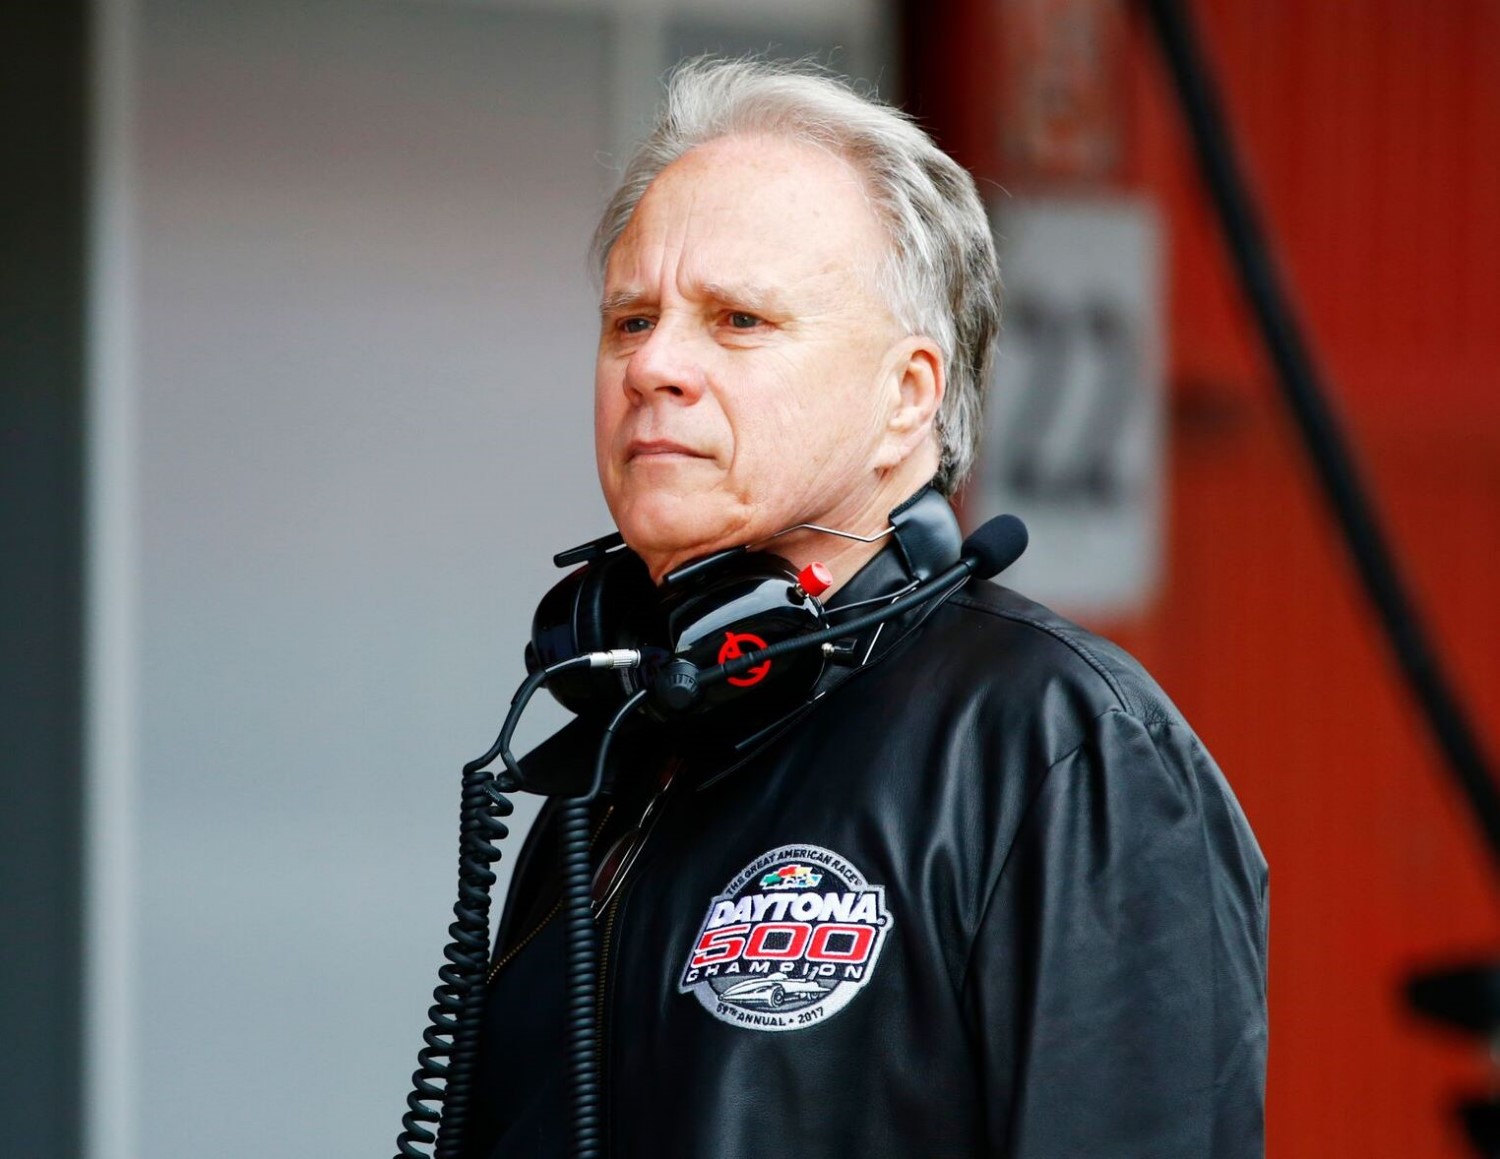 Gene Haas watches as his $millions go toward fielding a backmarker team